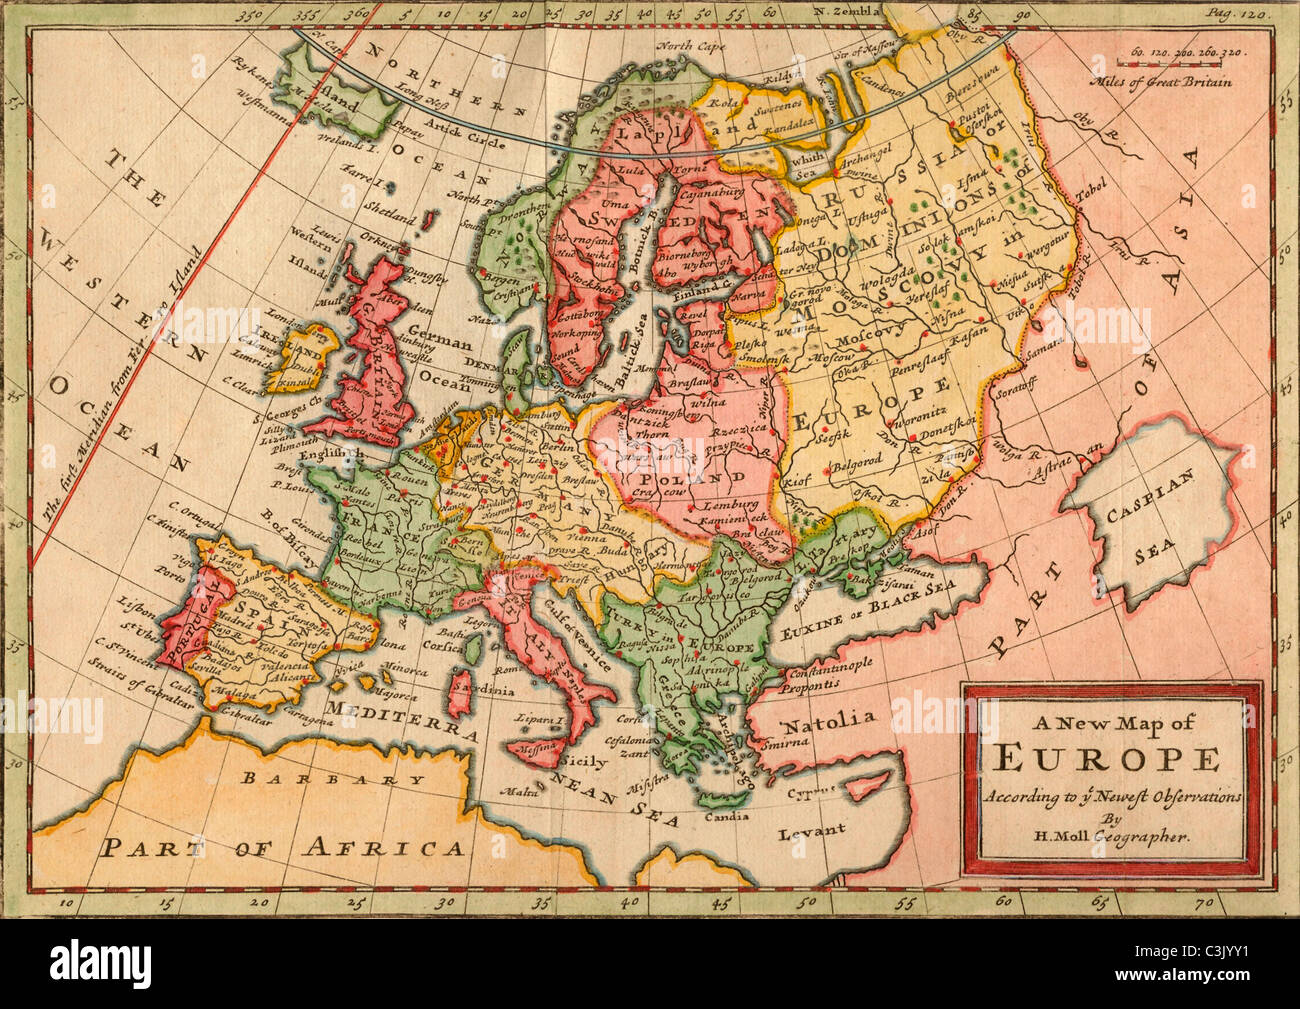 A New Map of Europe According to the Newest Observations by H. Moll Geographer. European map dated circa 1720 by Herman Moll. Stock Photo